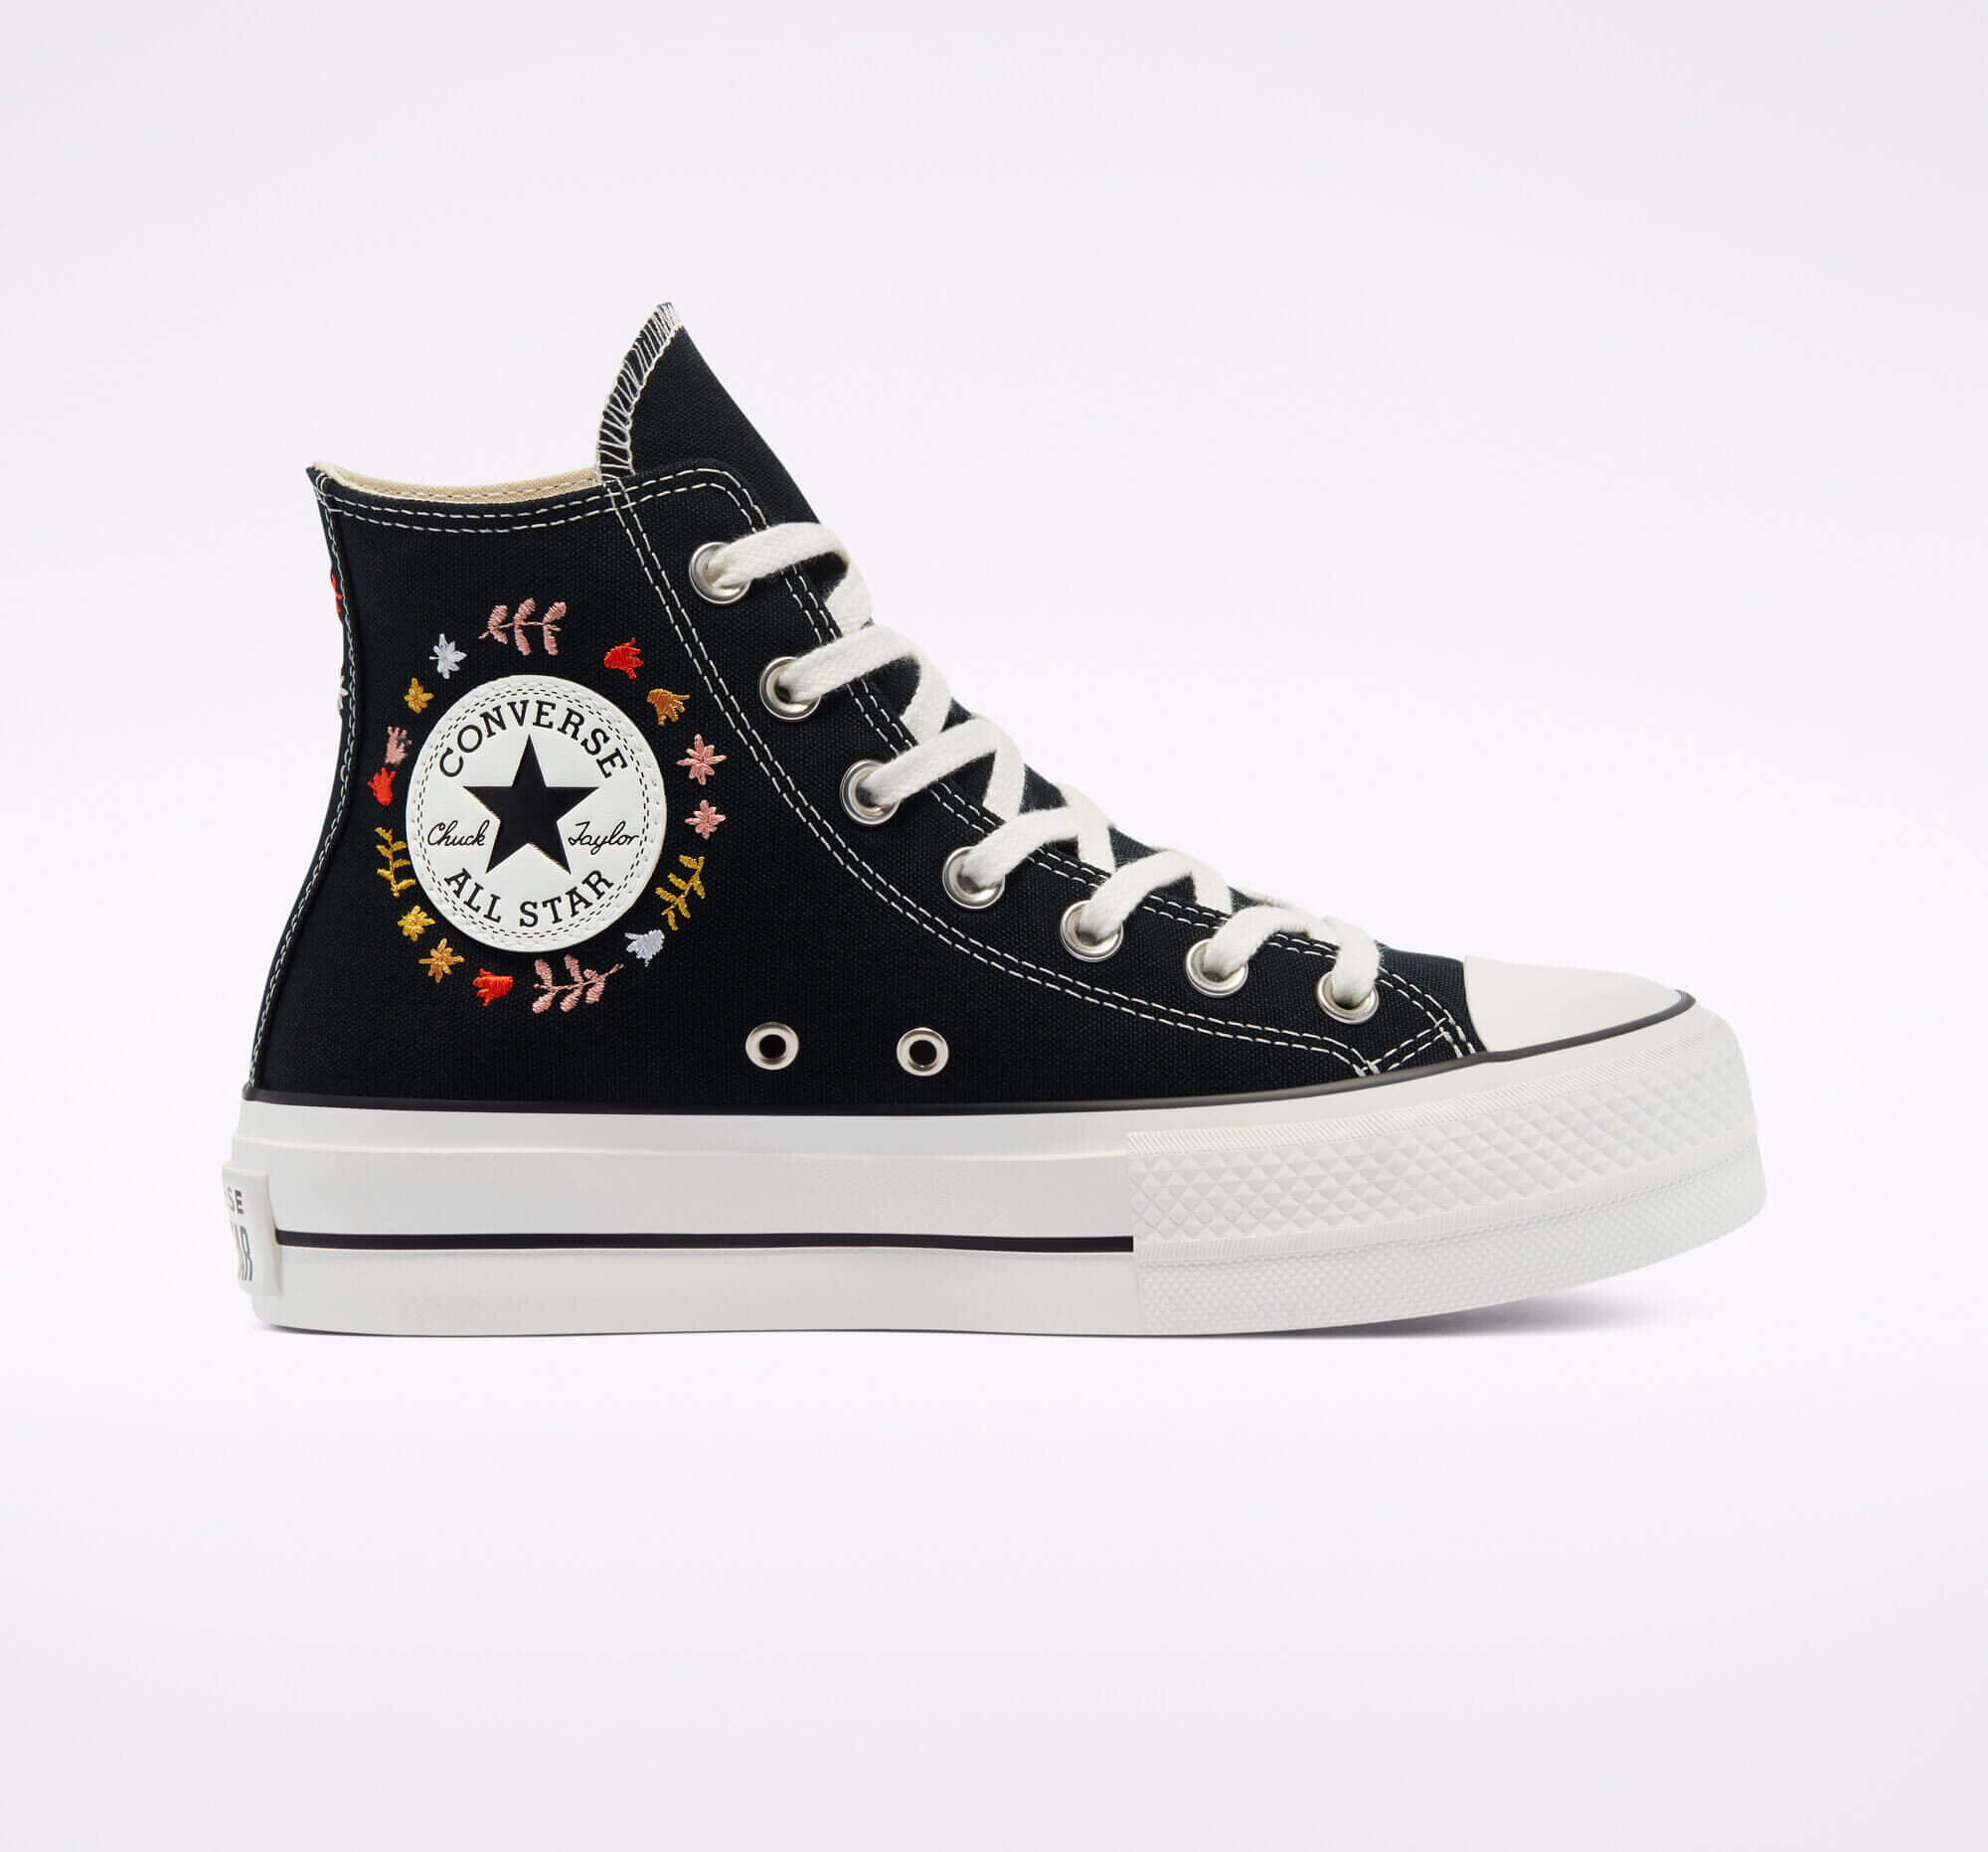 gys konvergens At blokere Converse 'My Story' Collection | Available Now — CNK Daily (ChicksNKicks)